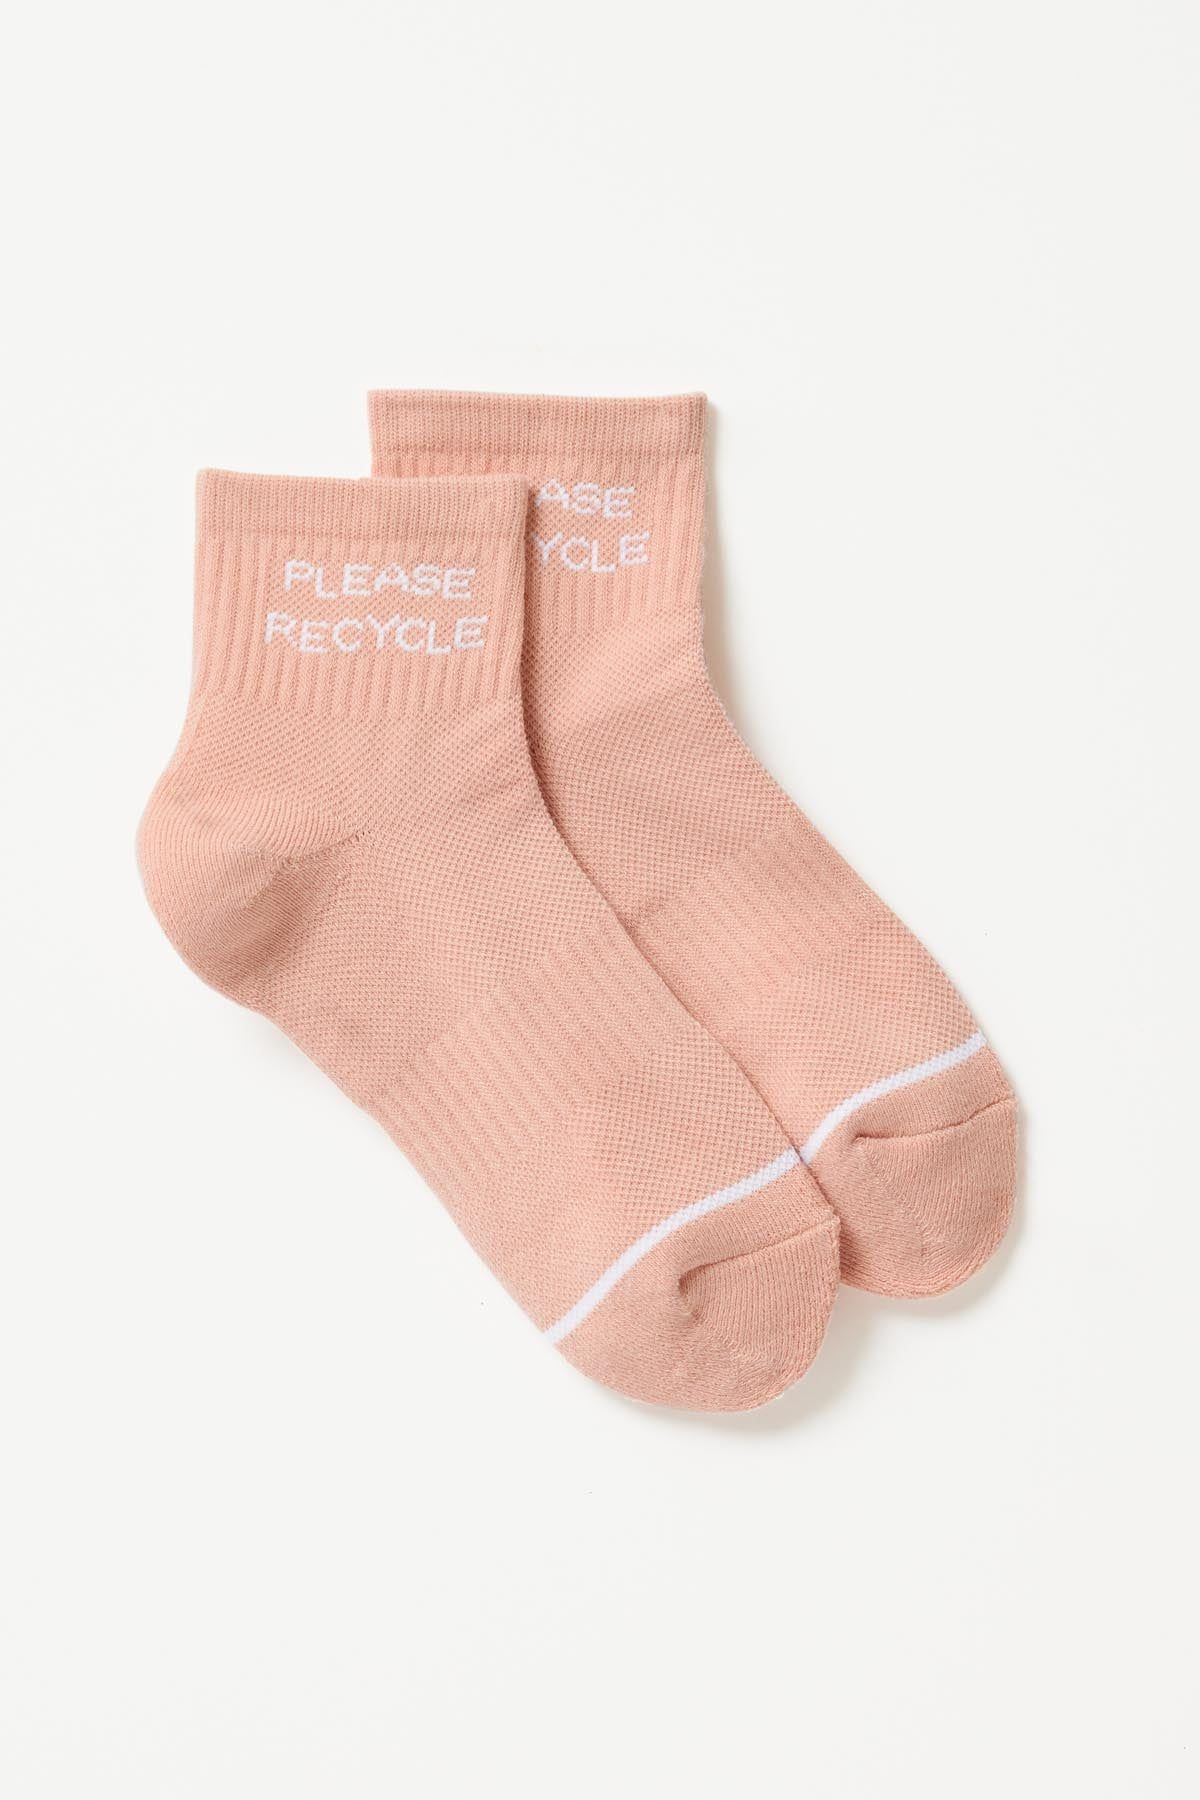 Misty Rose Please Recycle Quarter Crew Sock | Girlfriend Collective